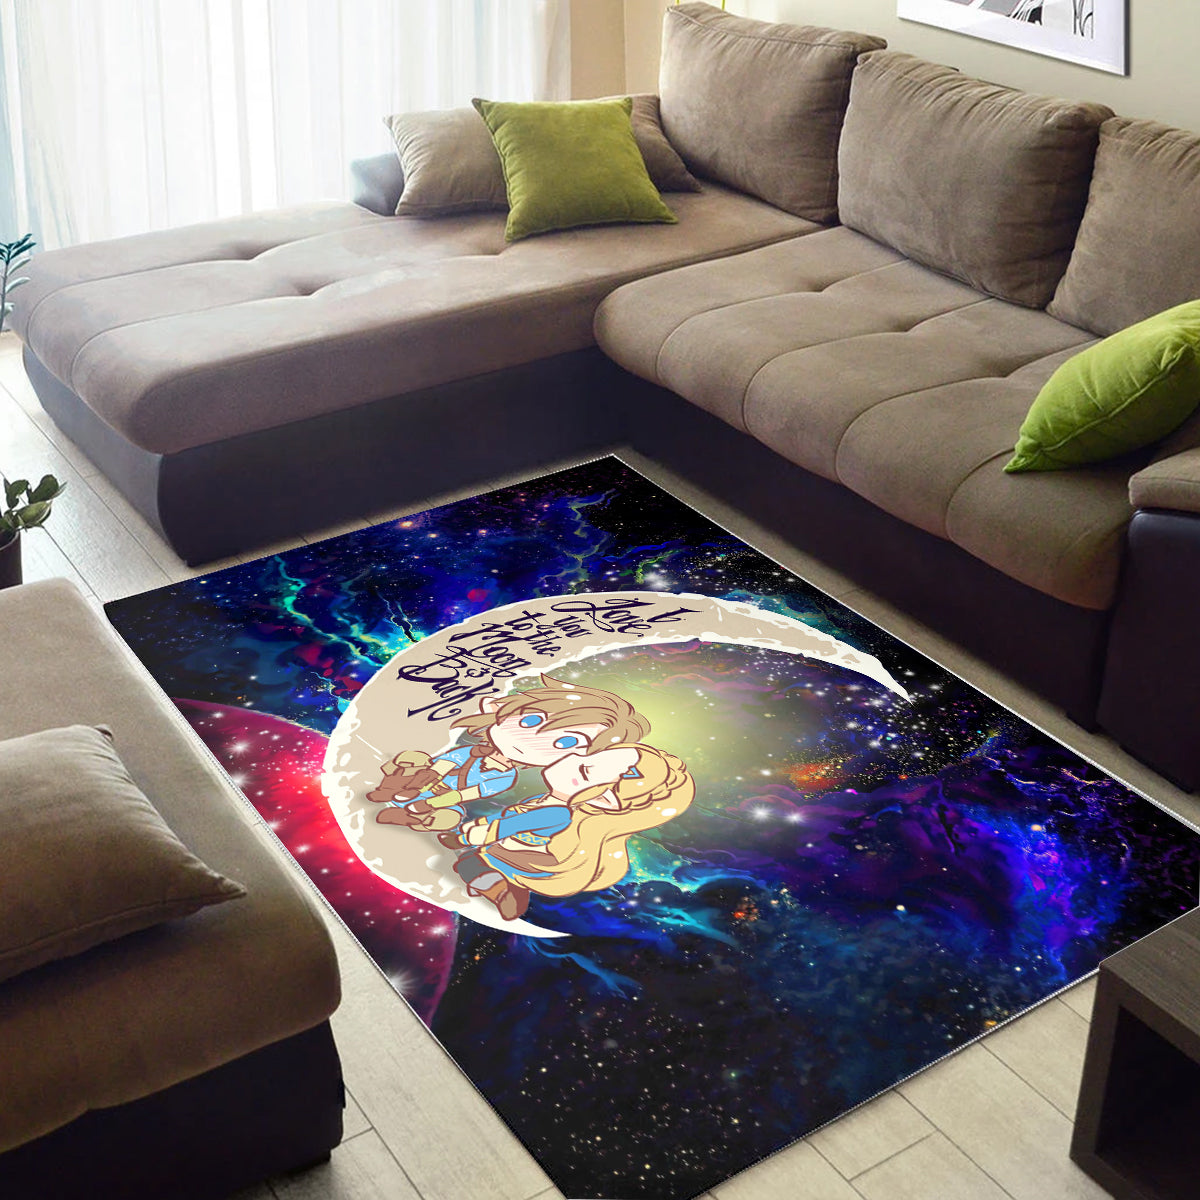 Legend Of Zelda Couple Chibi Couple Love You To The Moon Galaxy Carpet Rug Home Room Decor